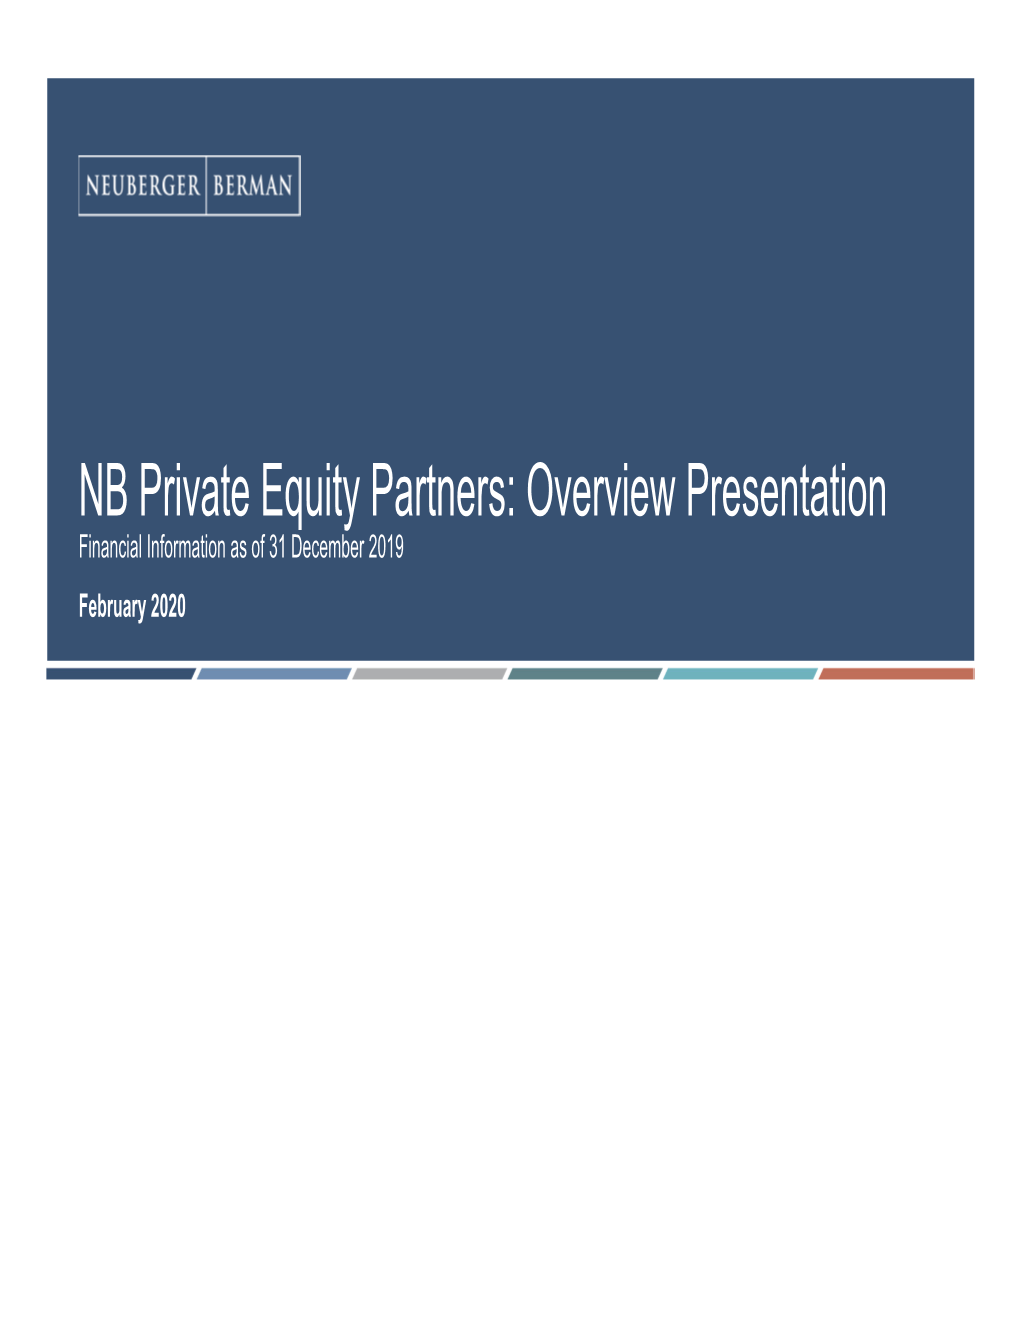 NB Private Equity Partners: Overview Presentation Financial Information As of 31 December 2019 February 2020 Why Invest in NBPE? Key Investment Merits